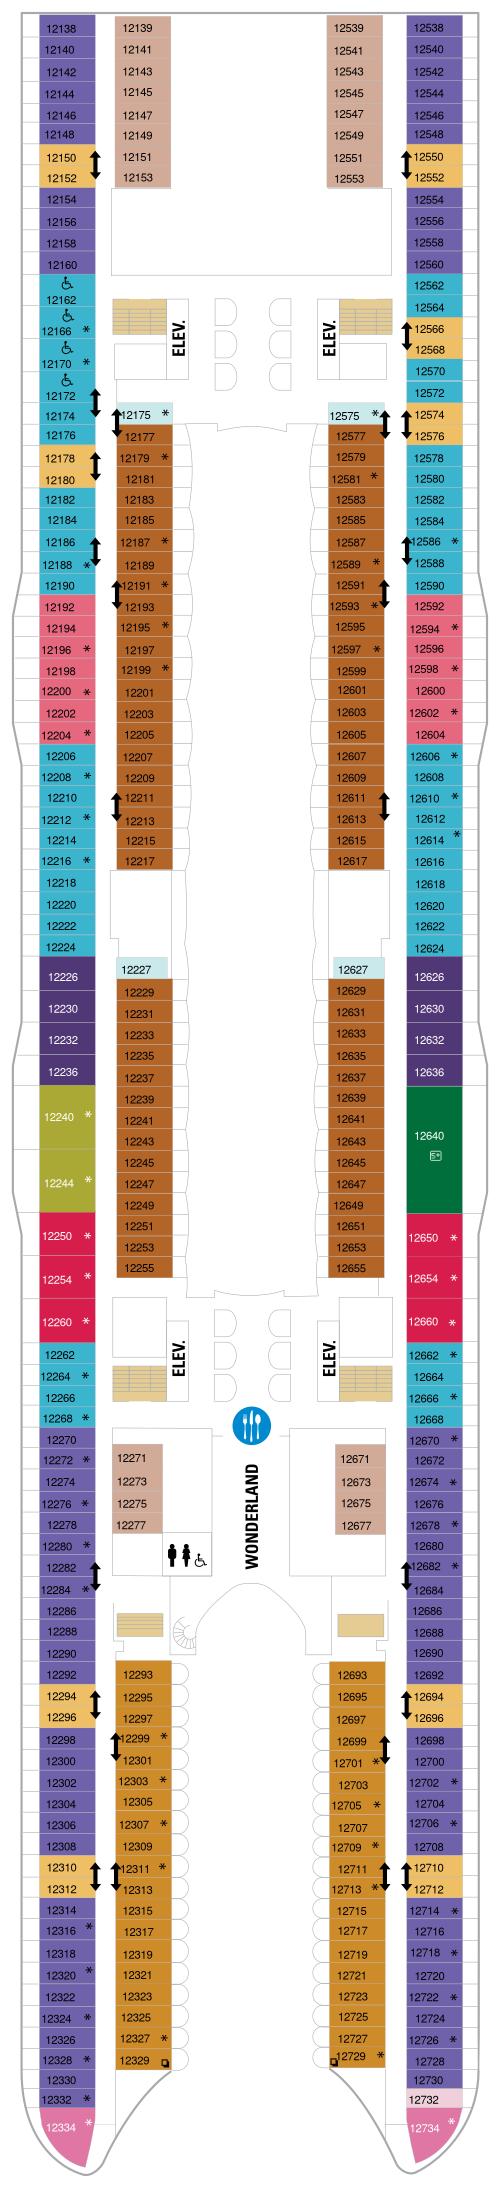 Symphony of the Seas Deck Plans CruiseInd